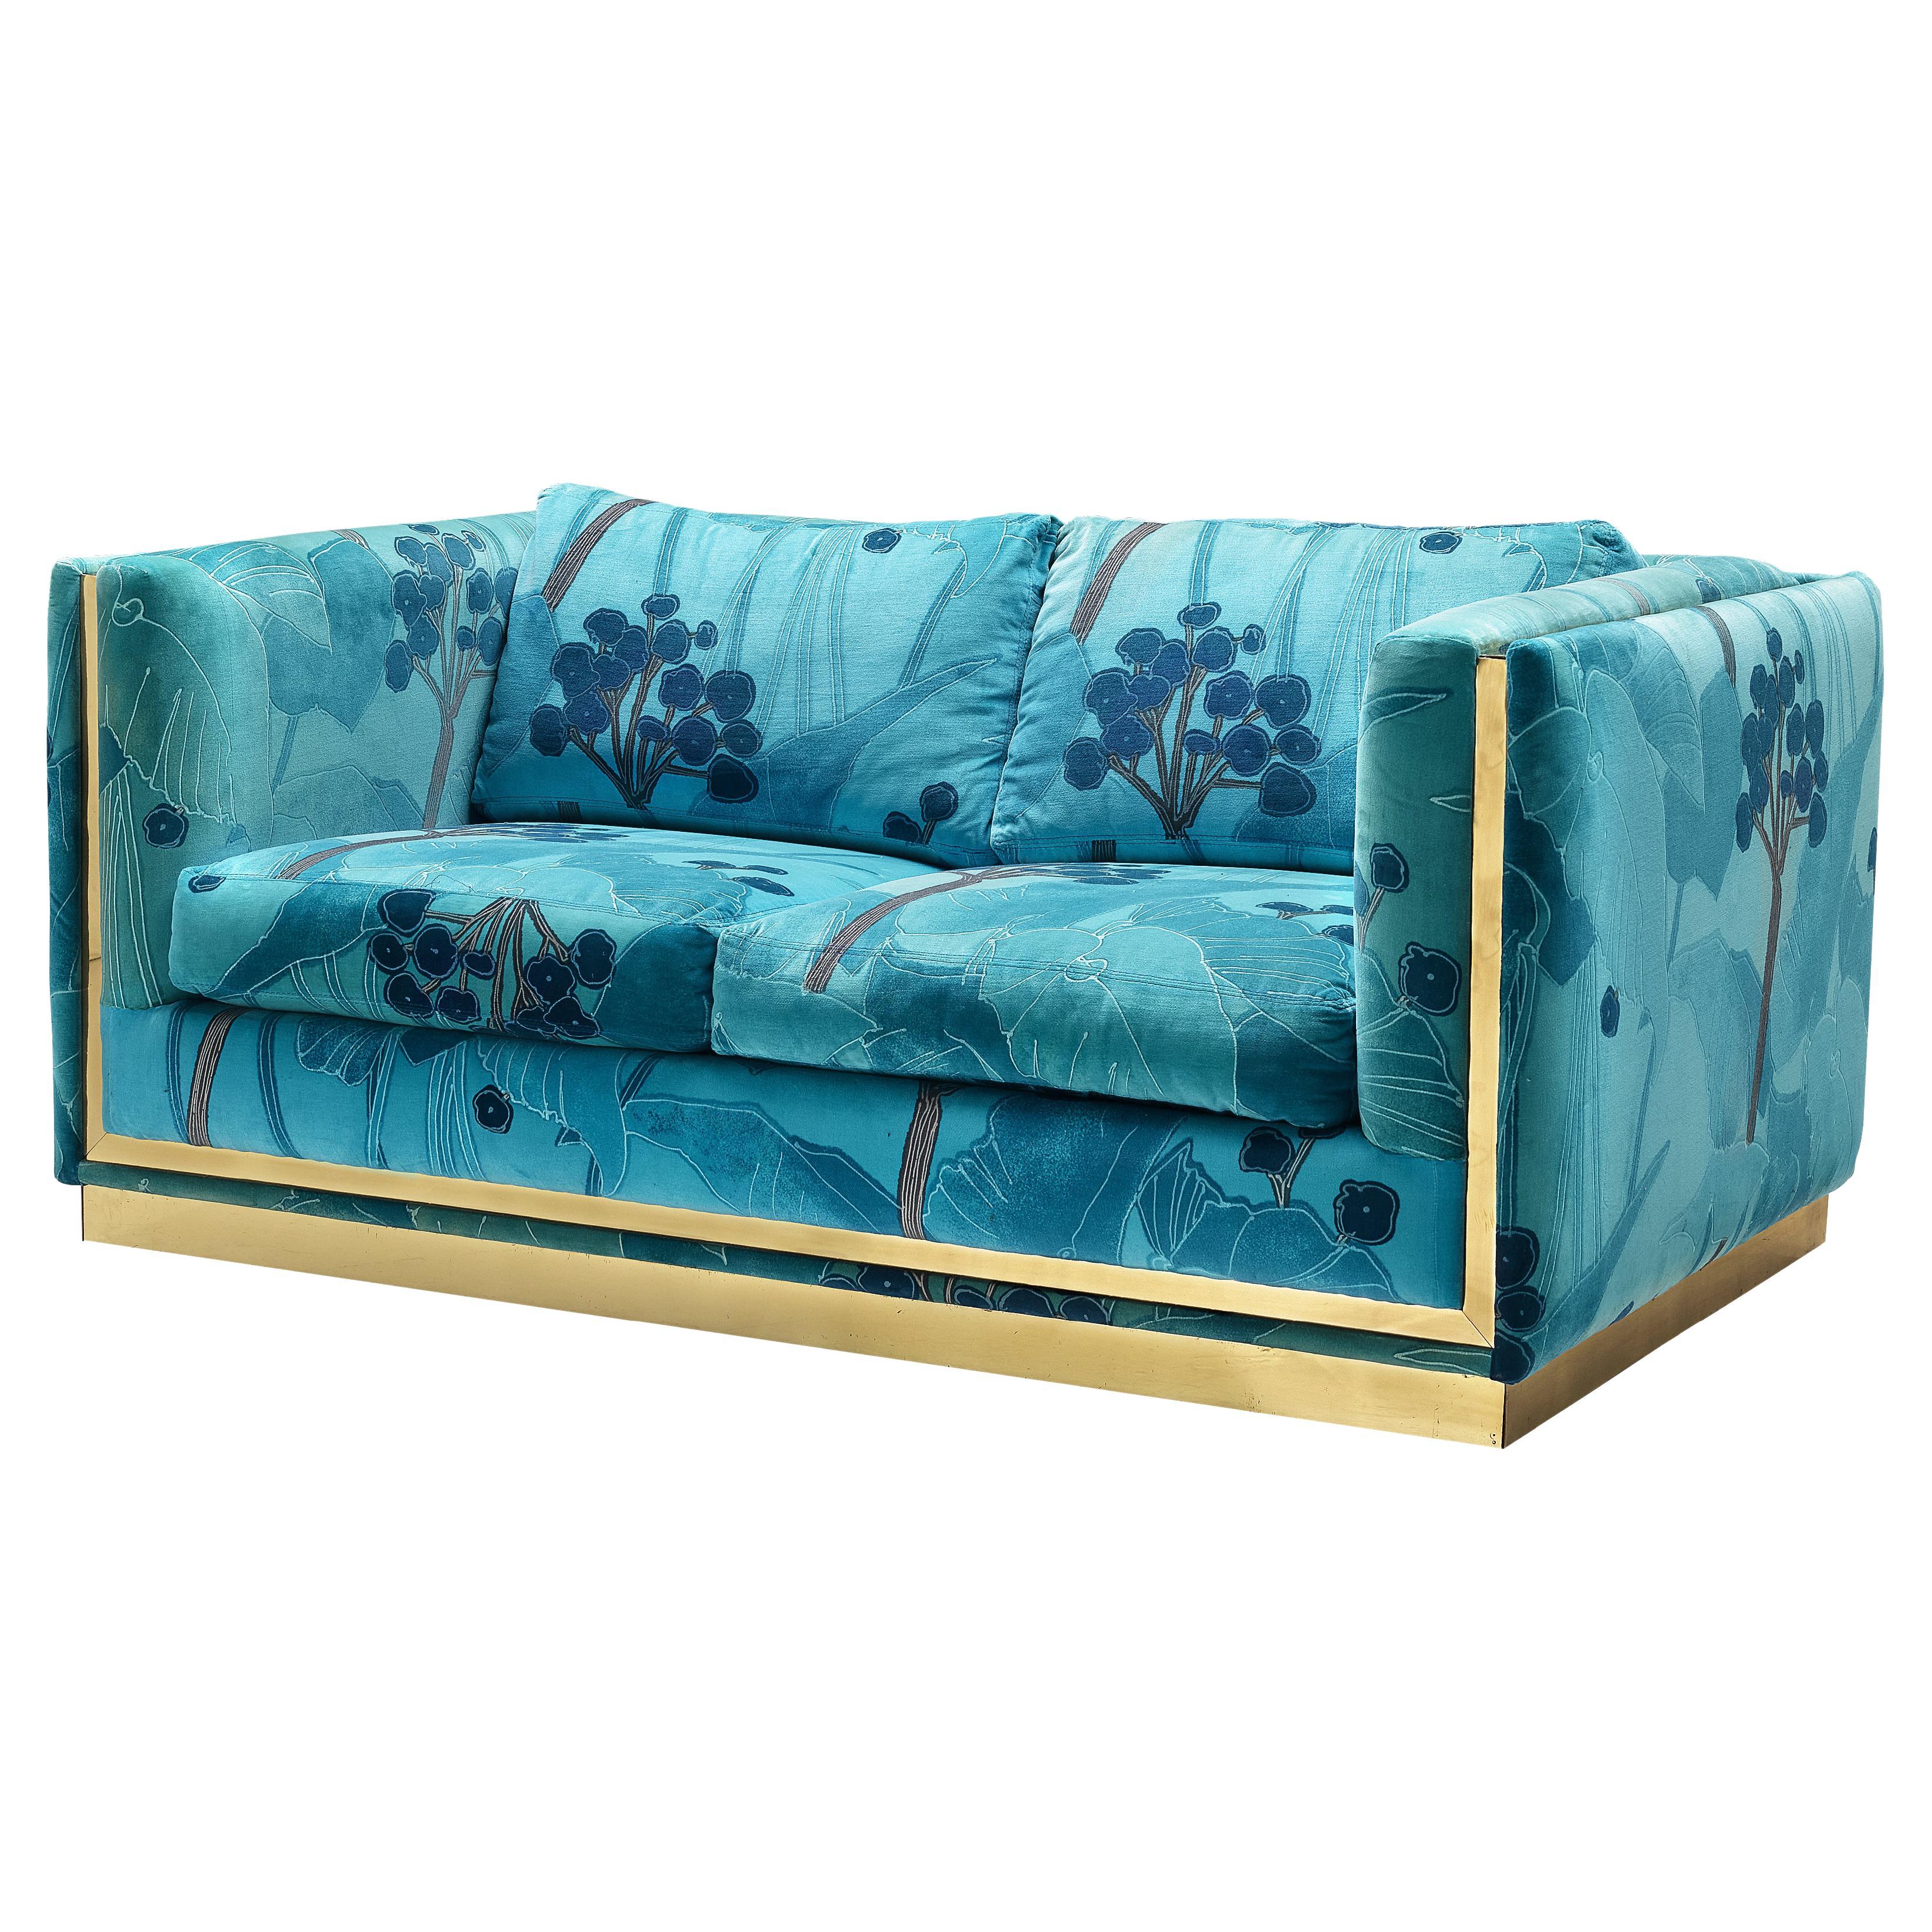 Italian Two-Seat Sofa in Blue and Turquoise Flower Upholstery